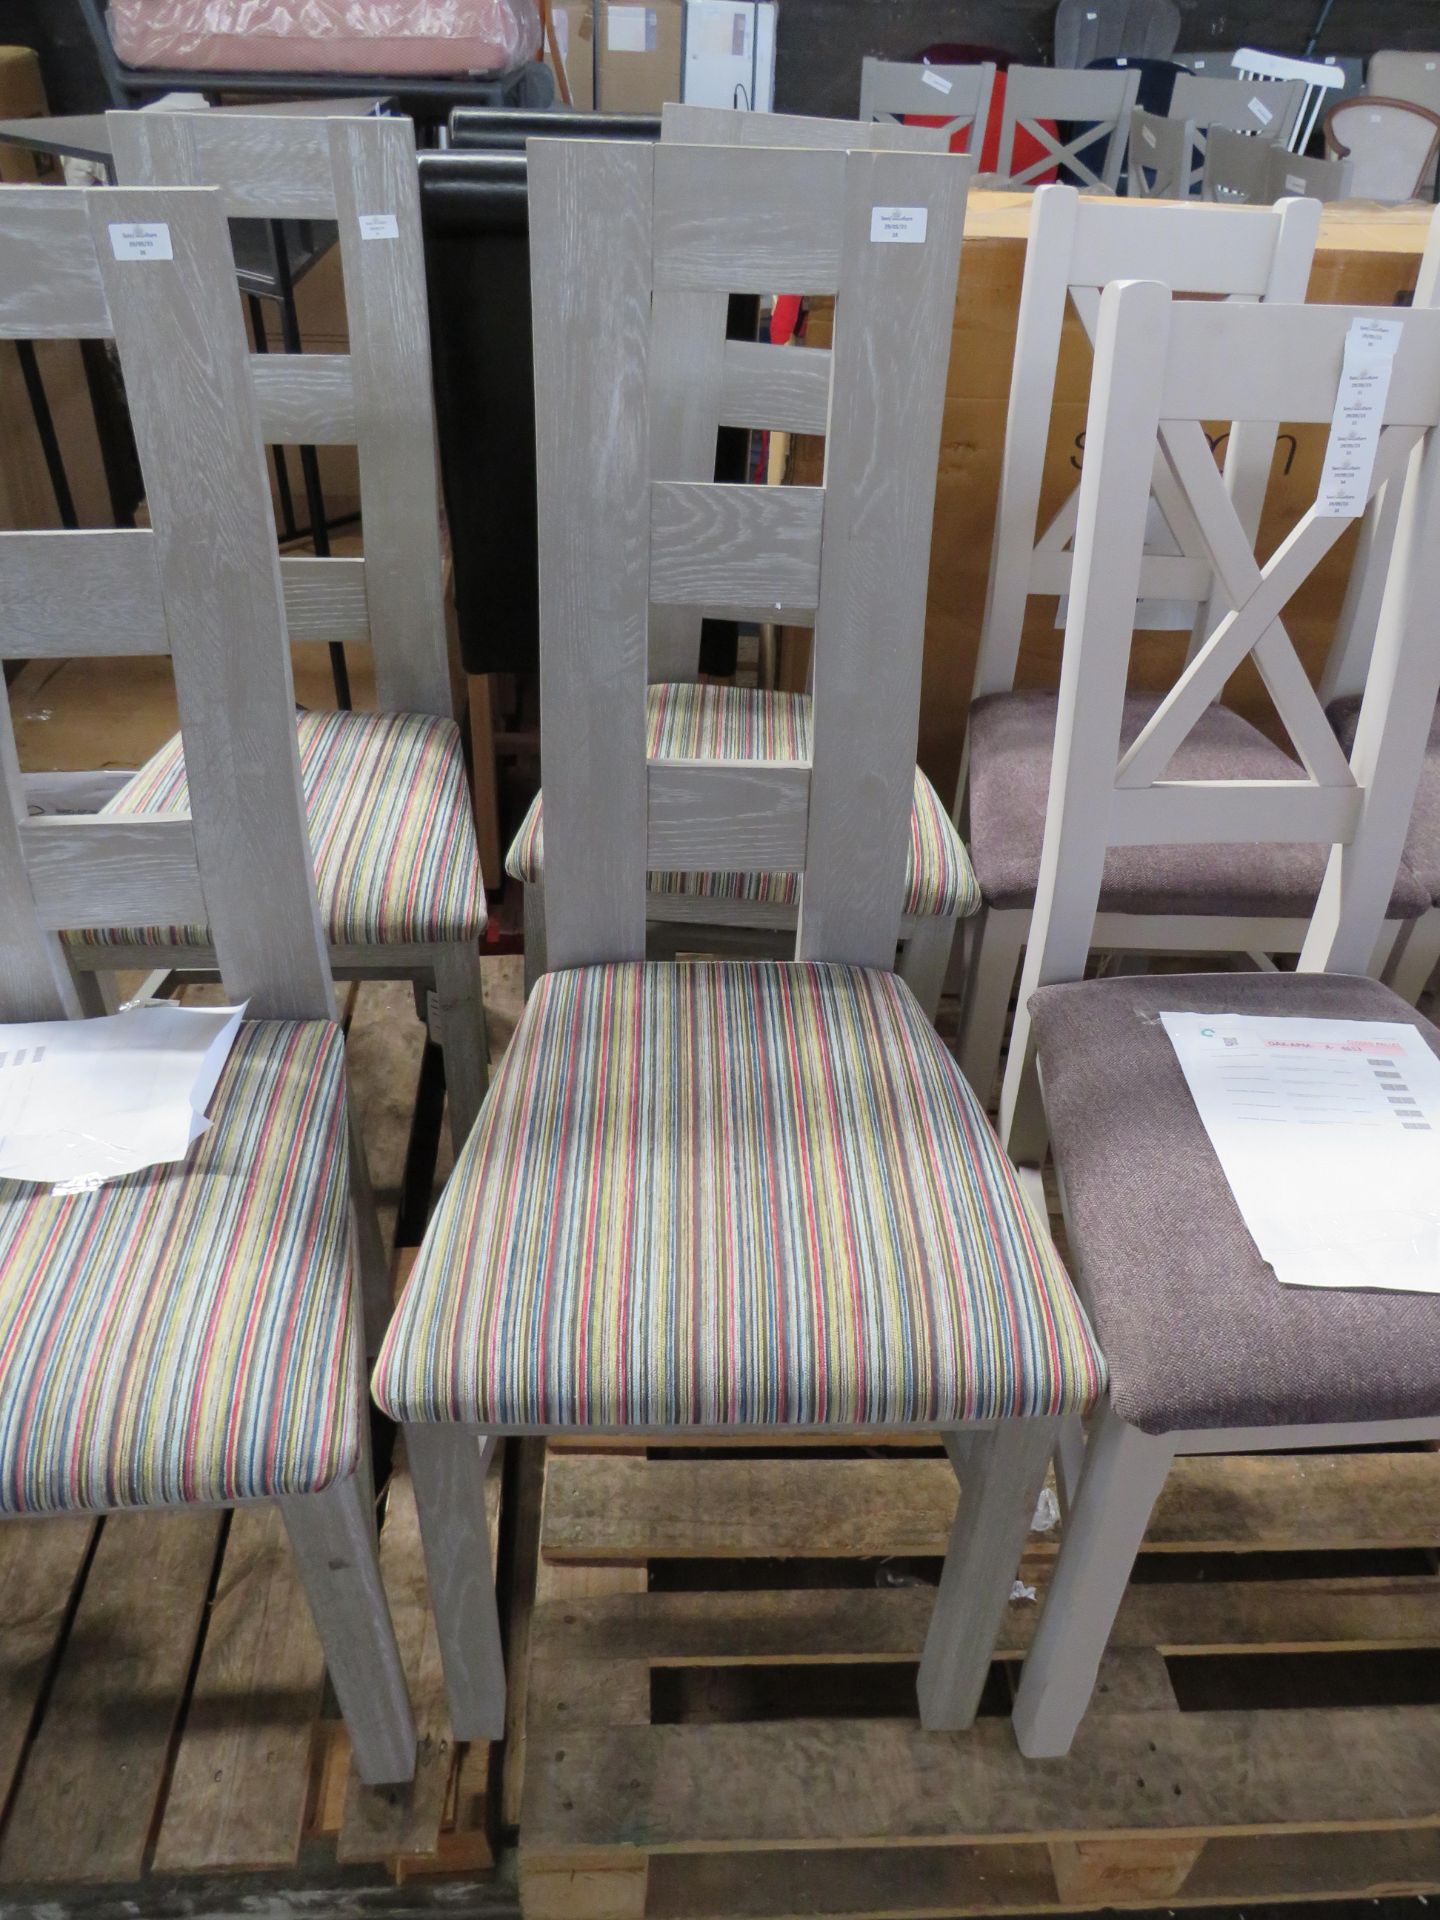 Oak Furnitureland Willow Light Grey Dining Chair with Striped Multi-Coloured Fabric Seat RRP 170.